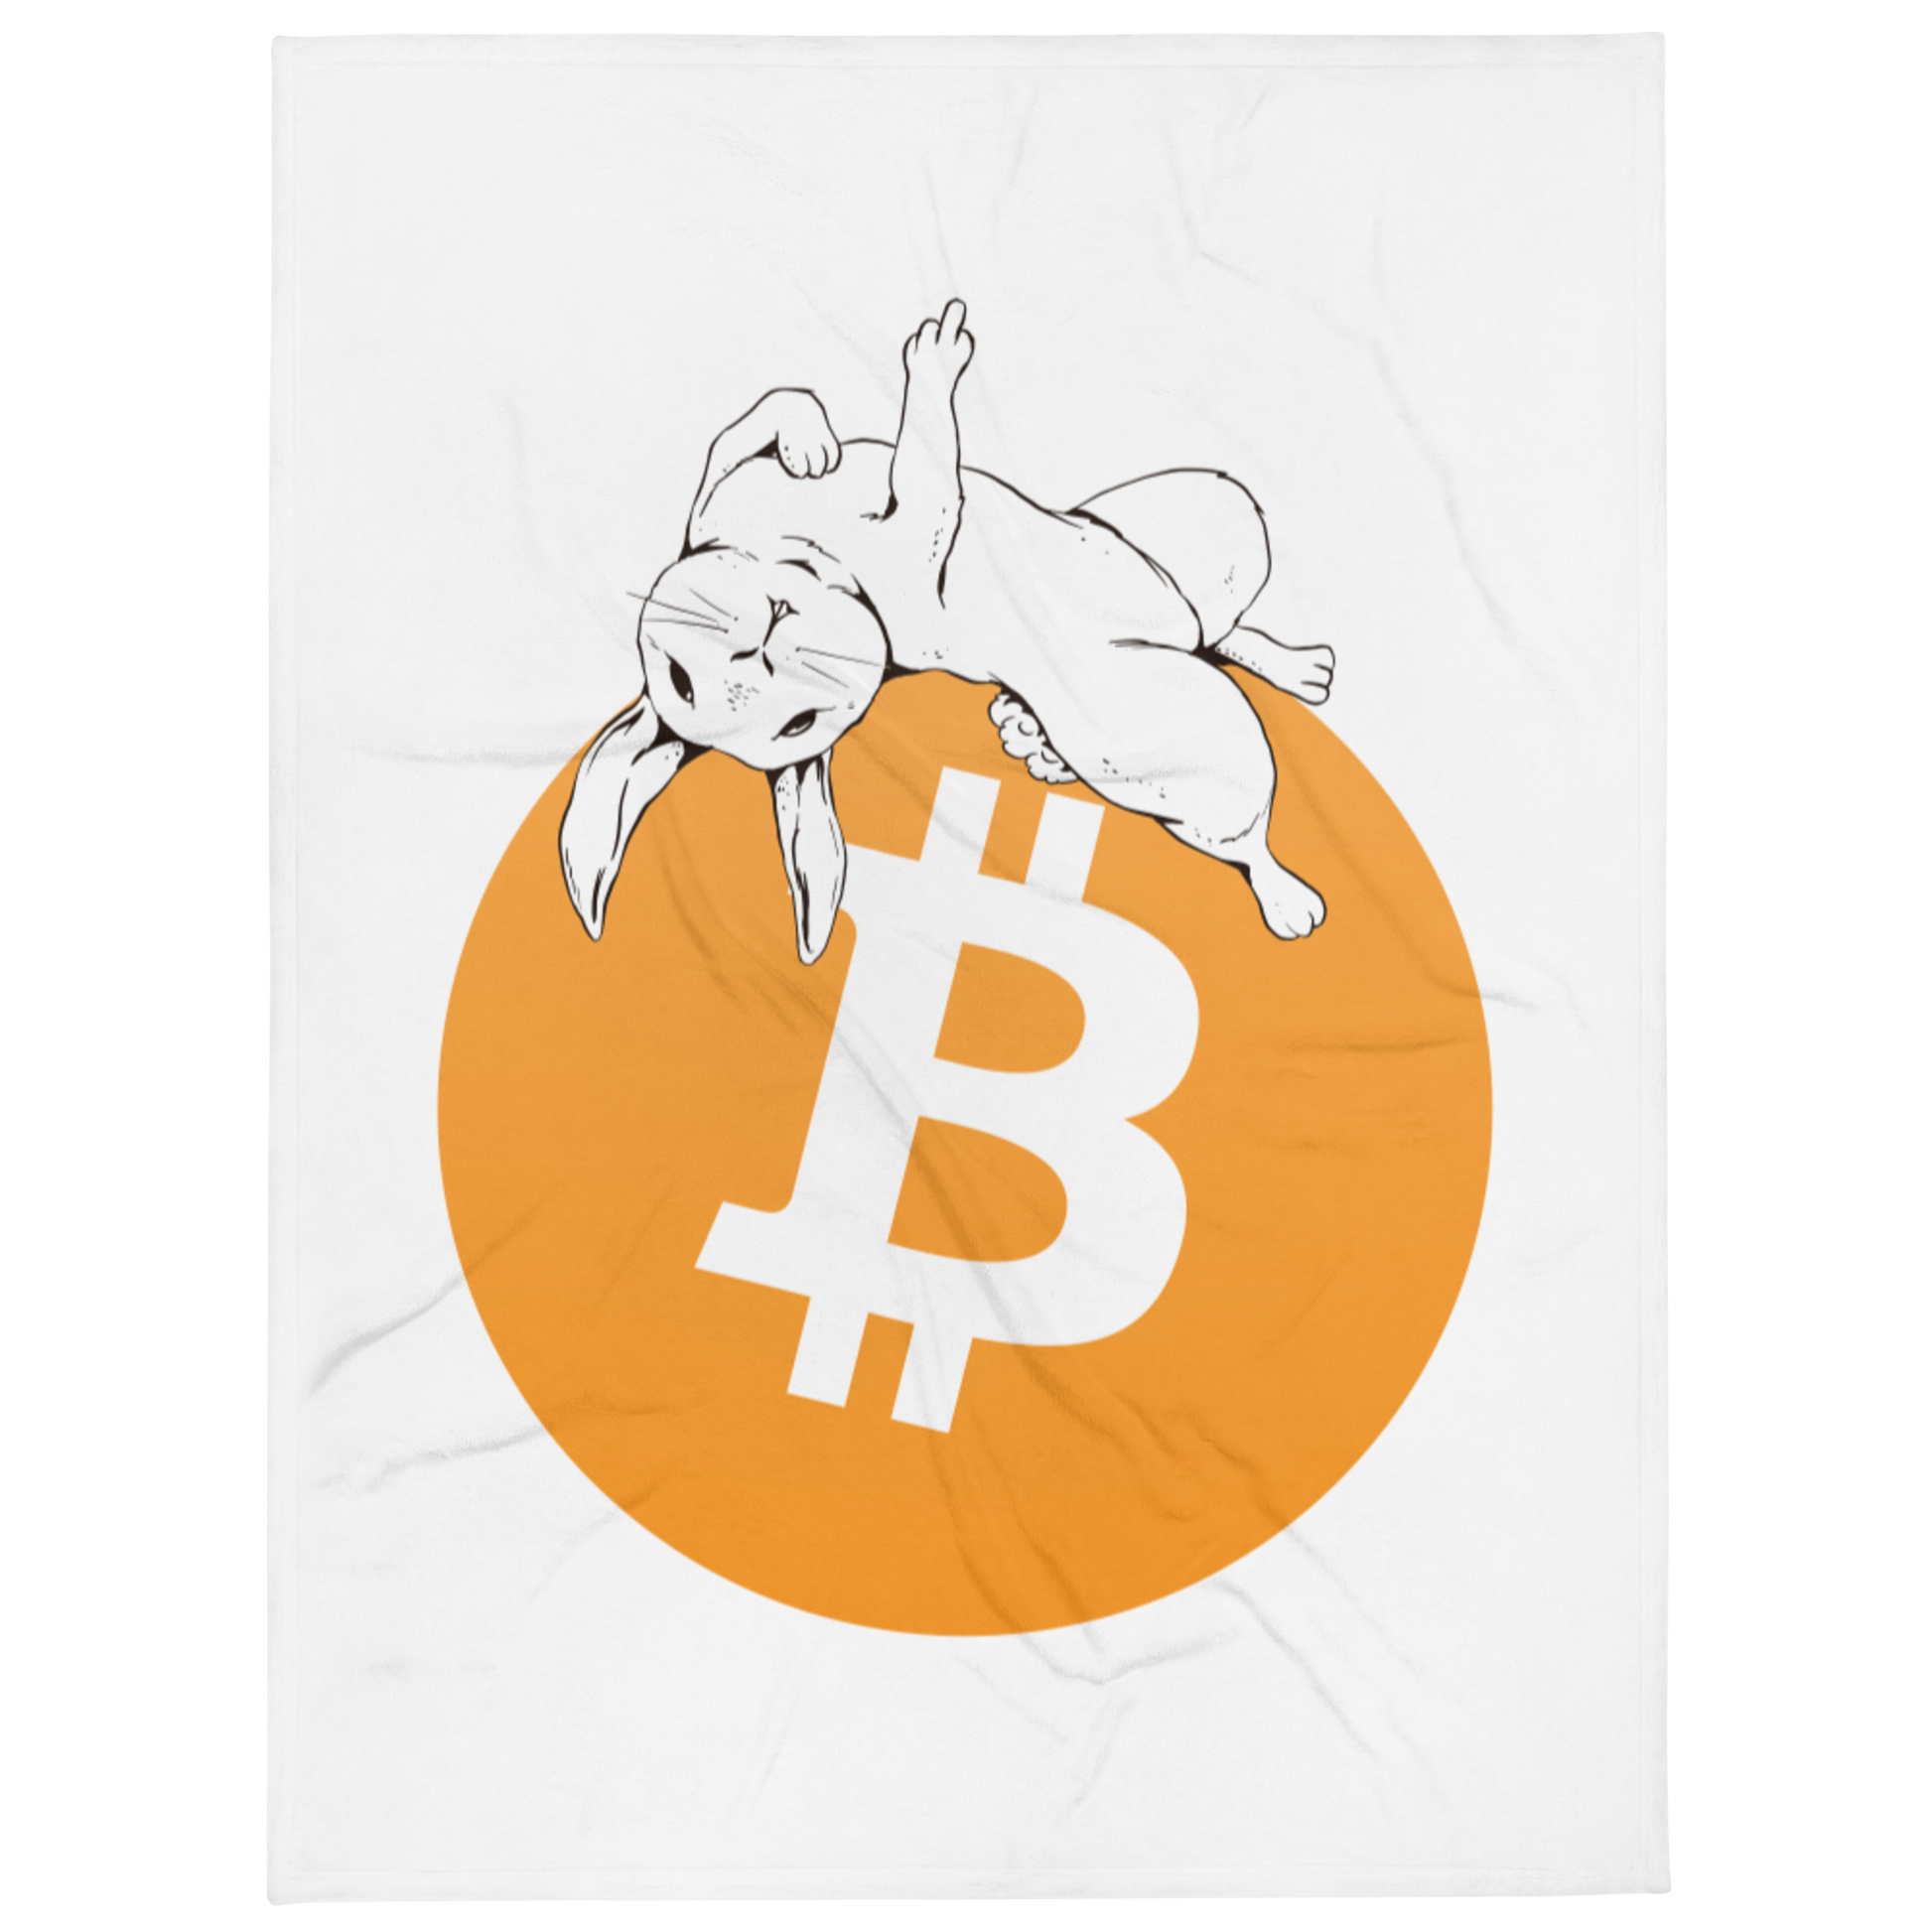 Front view of a white bitcoin blanket.